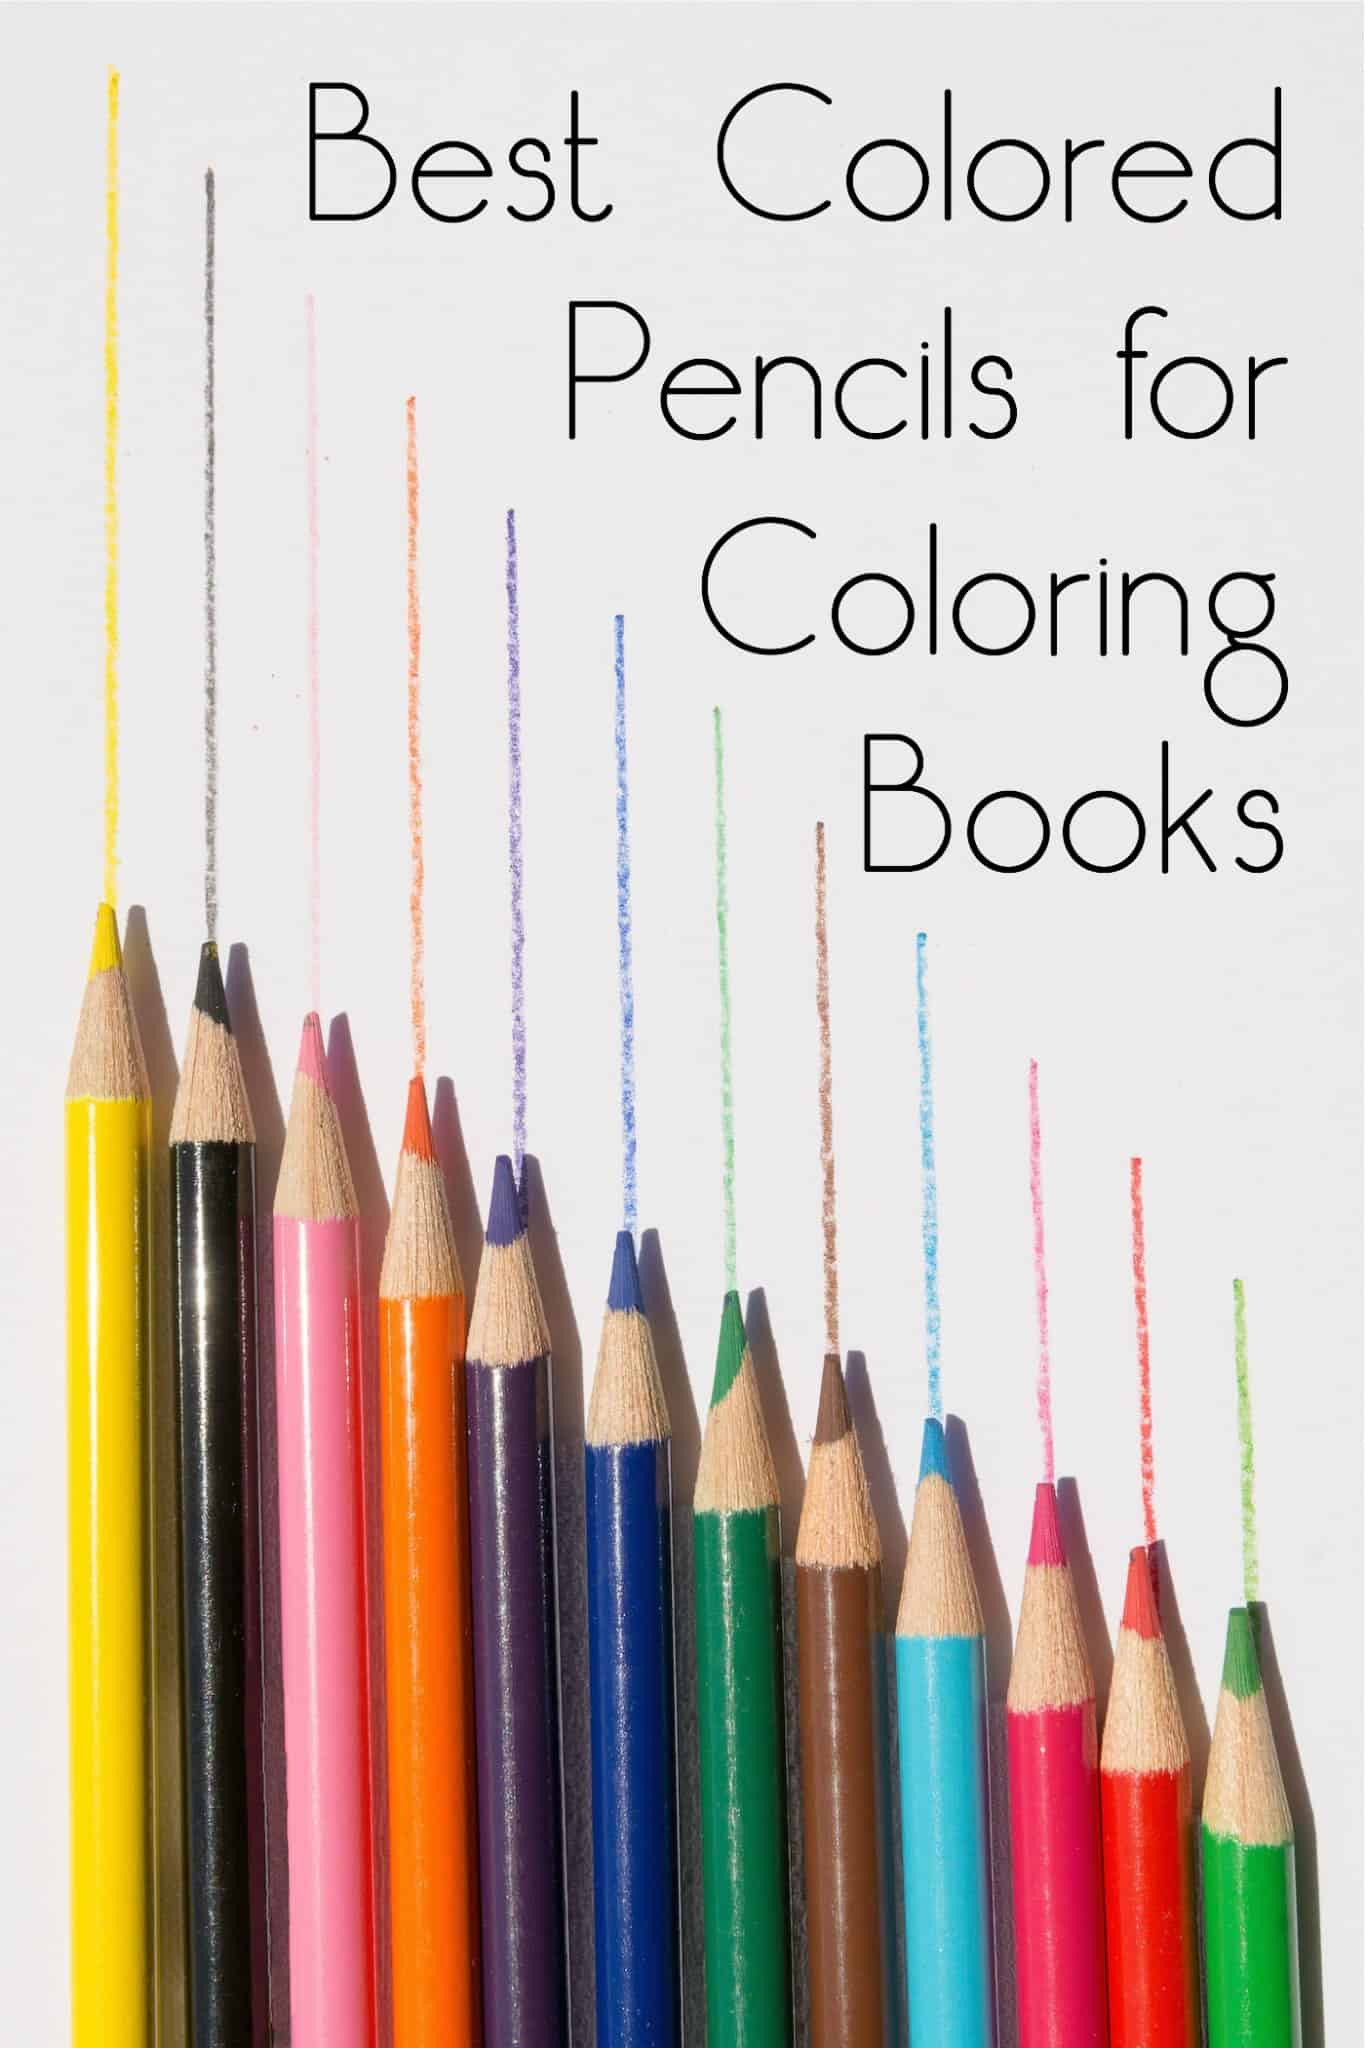 Best Colored Pencils For Coloring Books
 Best Colored Pencils for Coloring Books diycandy